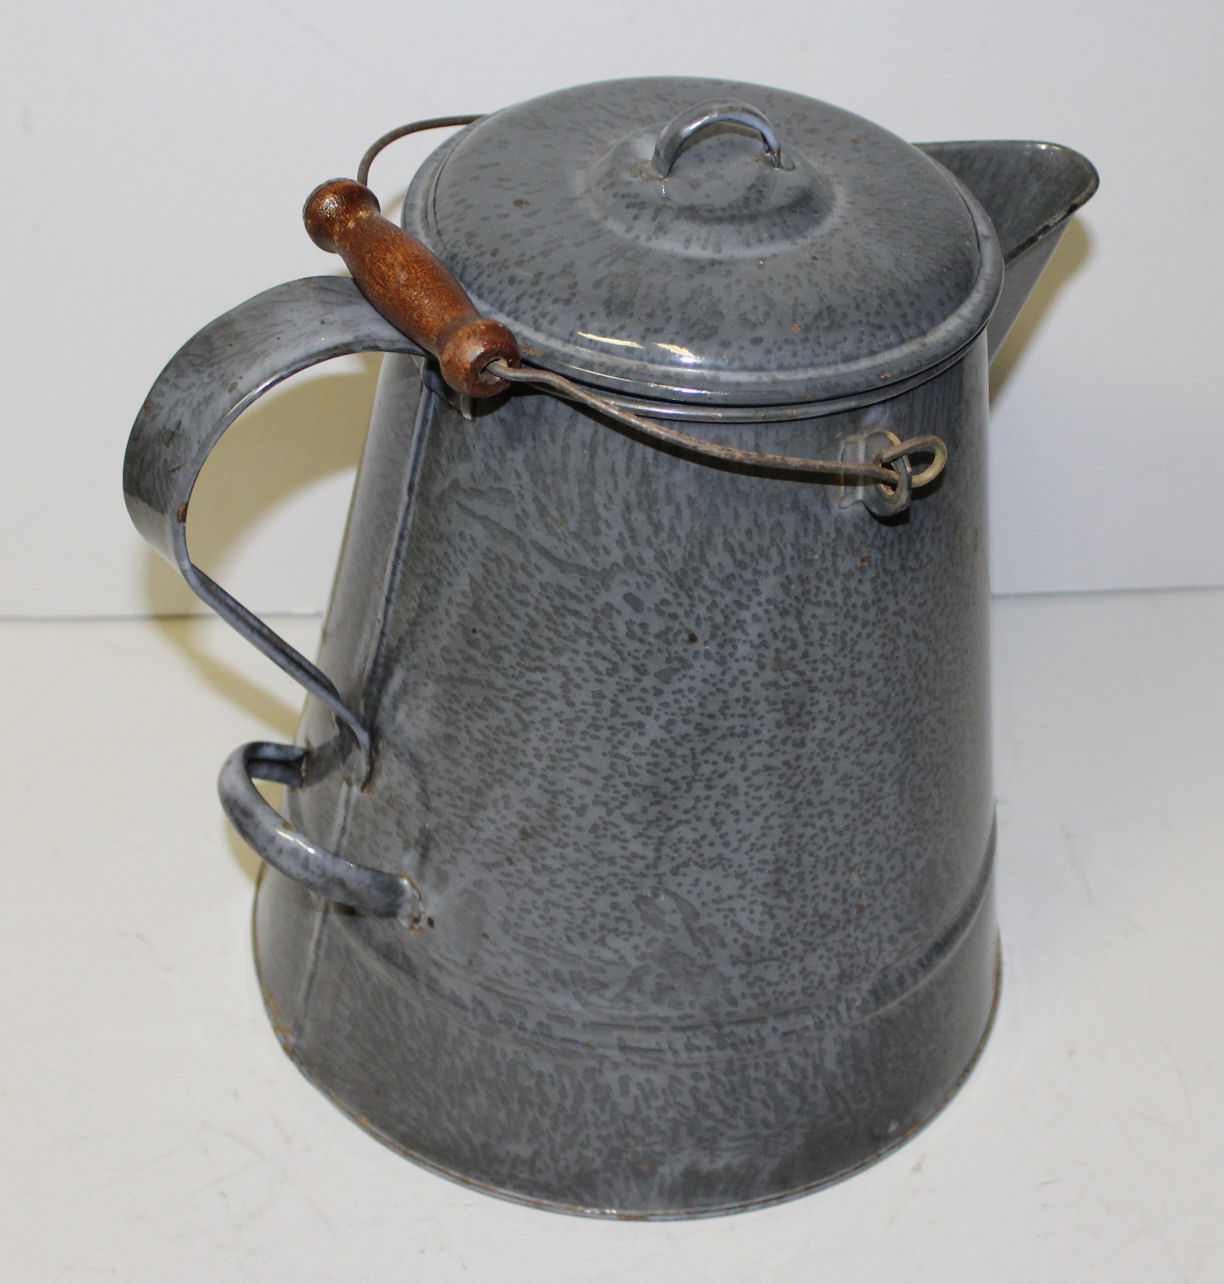 Bargain John's Antiques  Antique Graniteware Blue and White Coffee Pot  with Removable Lid - Bargain John's Antiques